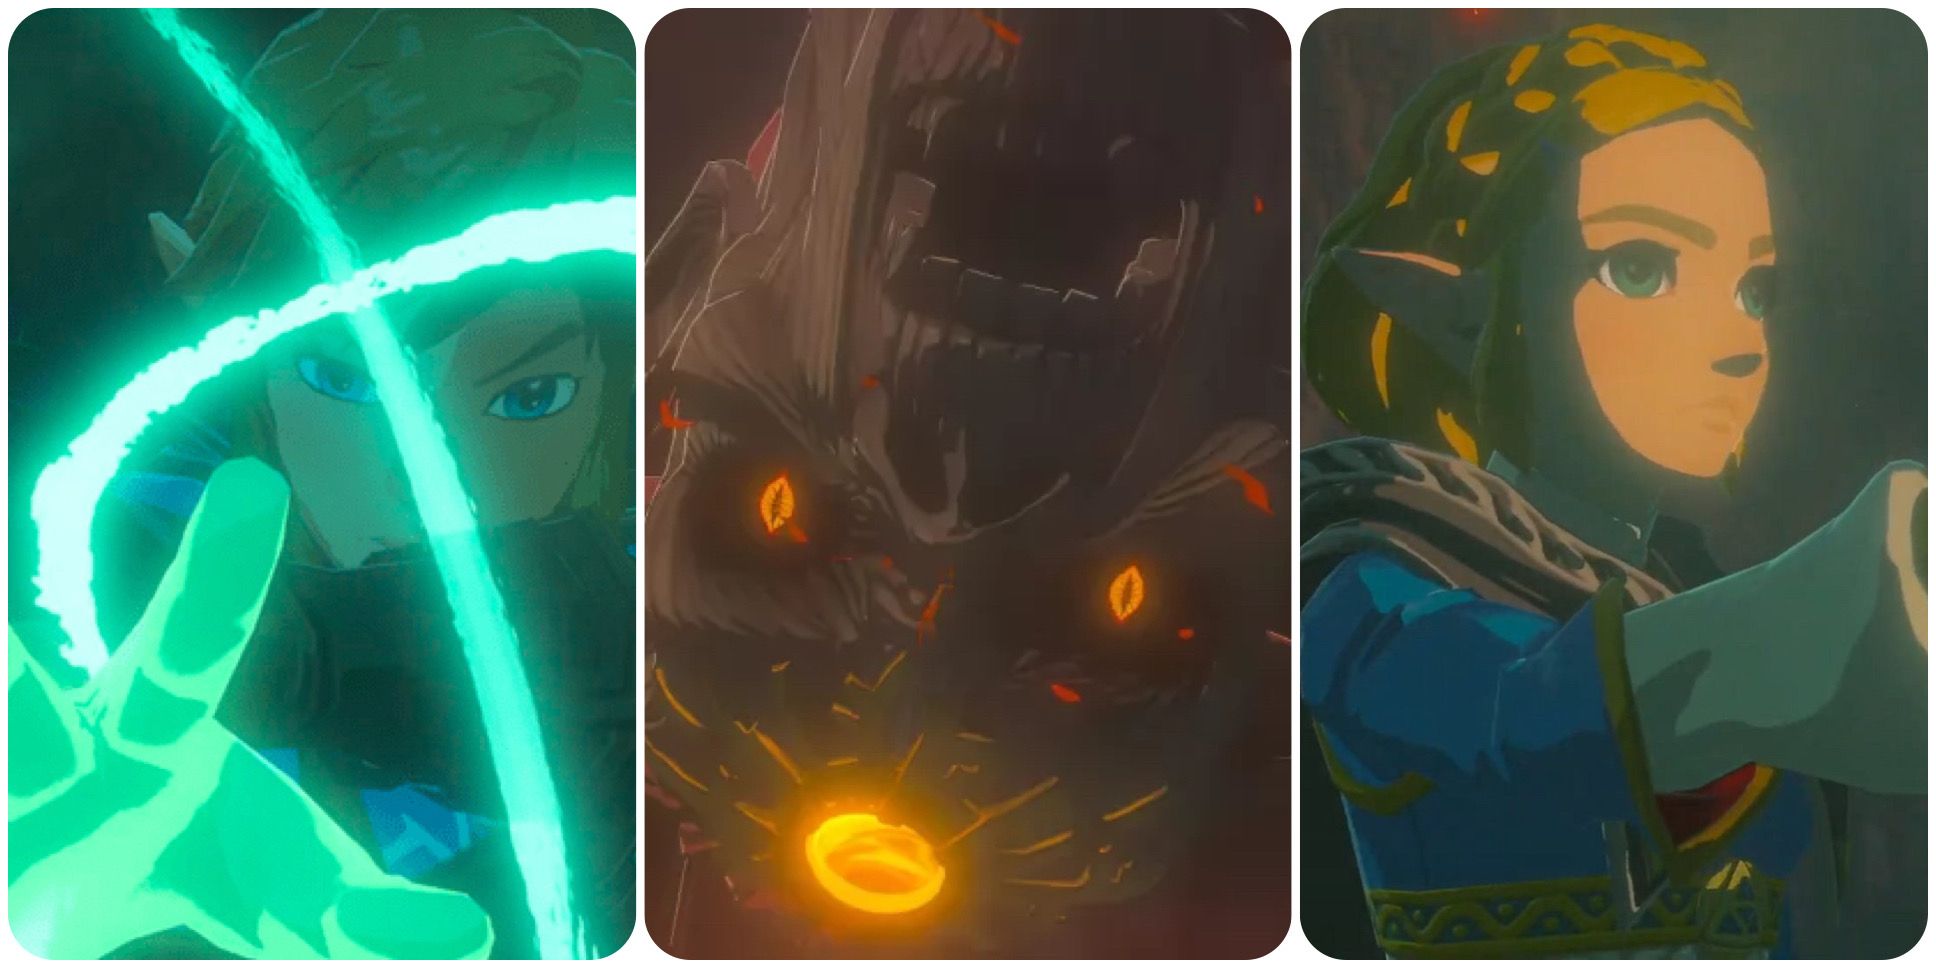 A split image of stills from the Tears of the Kingdom promo trailer